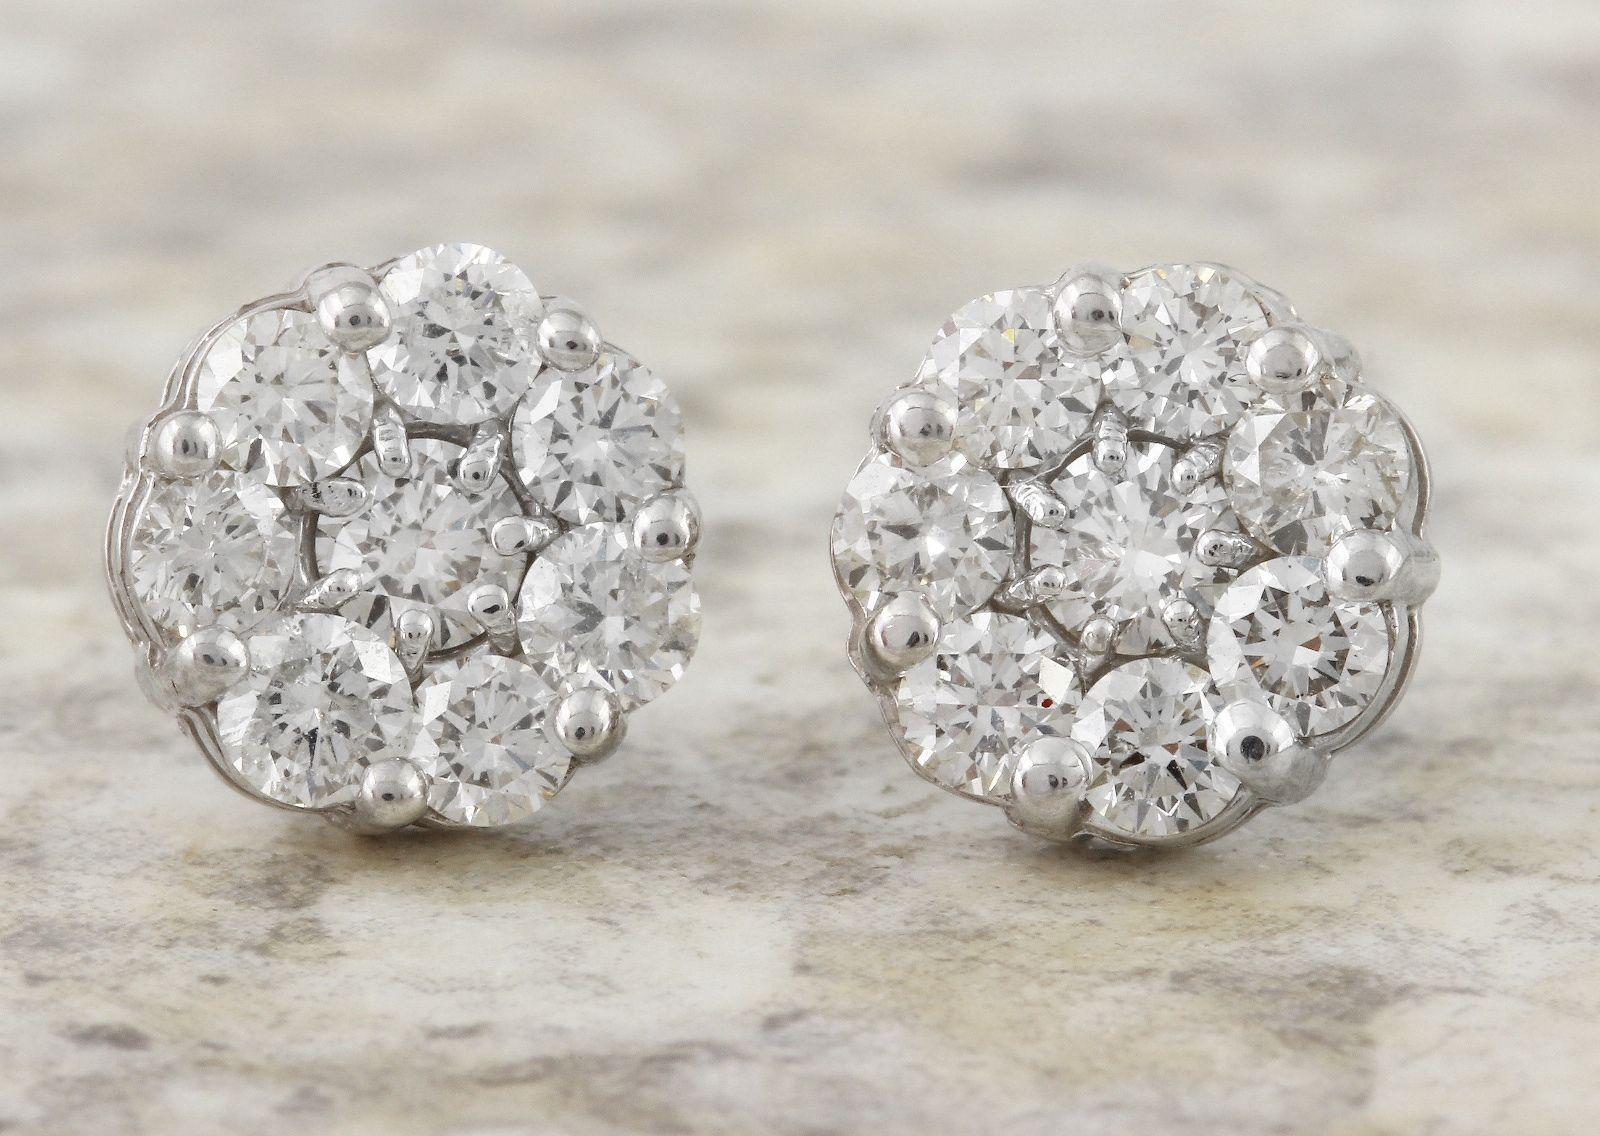 Exquisite 1.65 Carats Natural VS Diamond 14K Solid White Gold Stud Earrings

Amazing looking piece!

Total Natural Round Cut Diamonds Weight: 1.65 Carats (both earrings) VS2-SI1 / G-H

Diameter of the Earring is: 9.68mm

Total Earrings Weight is: